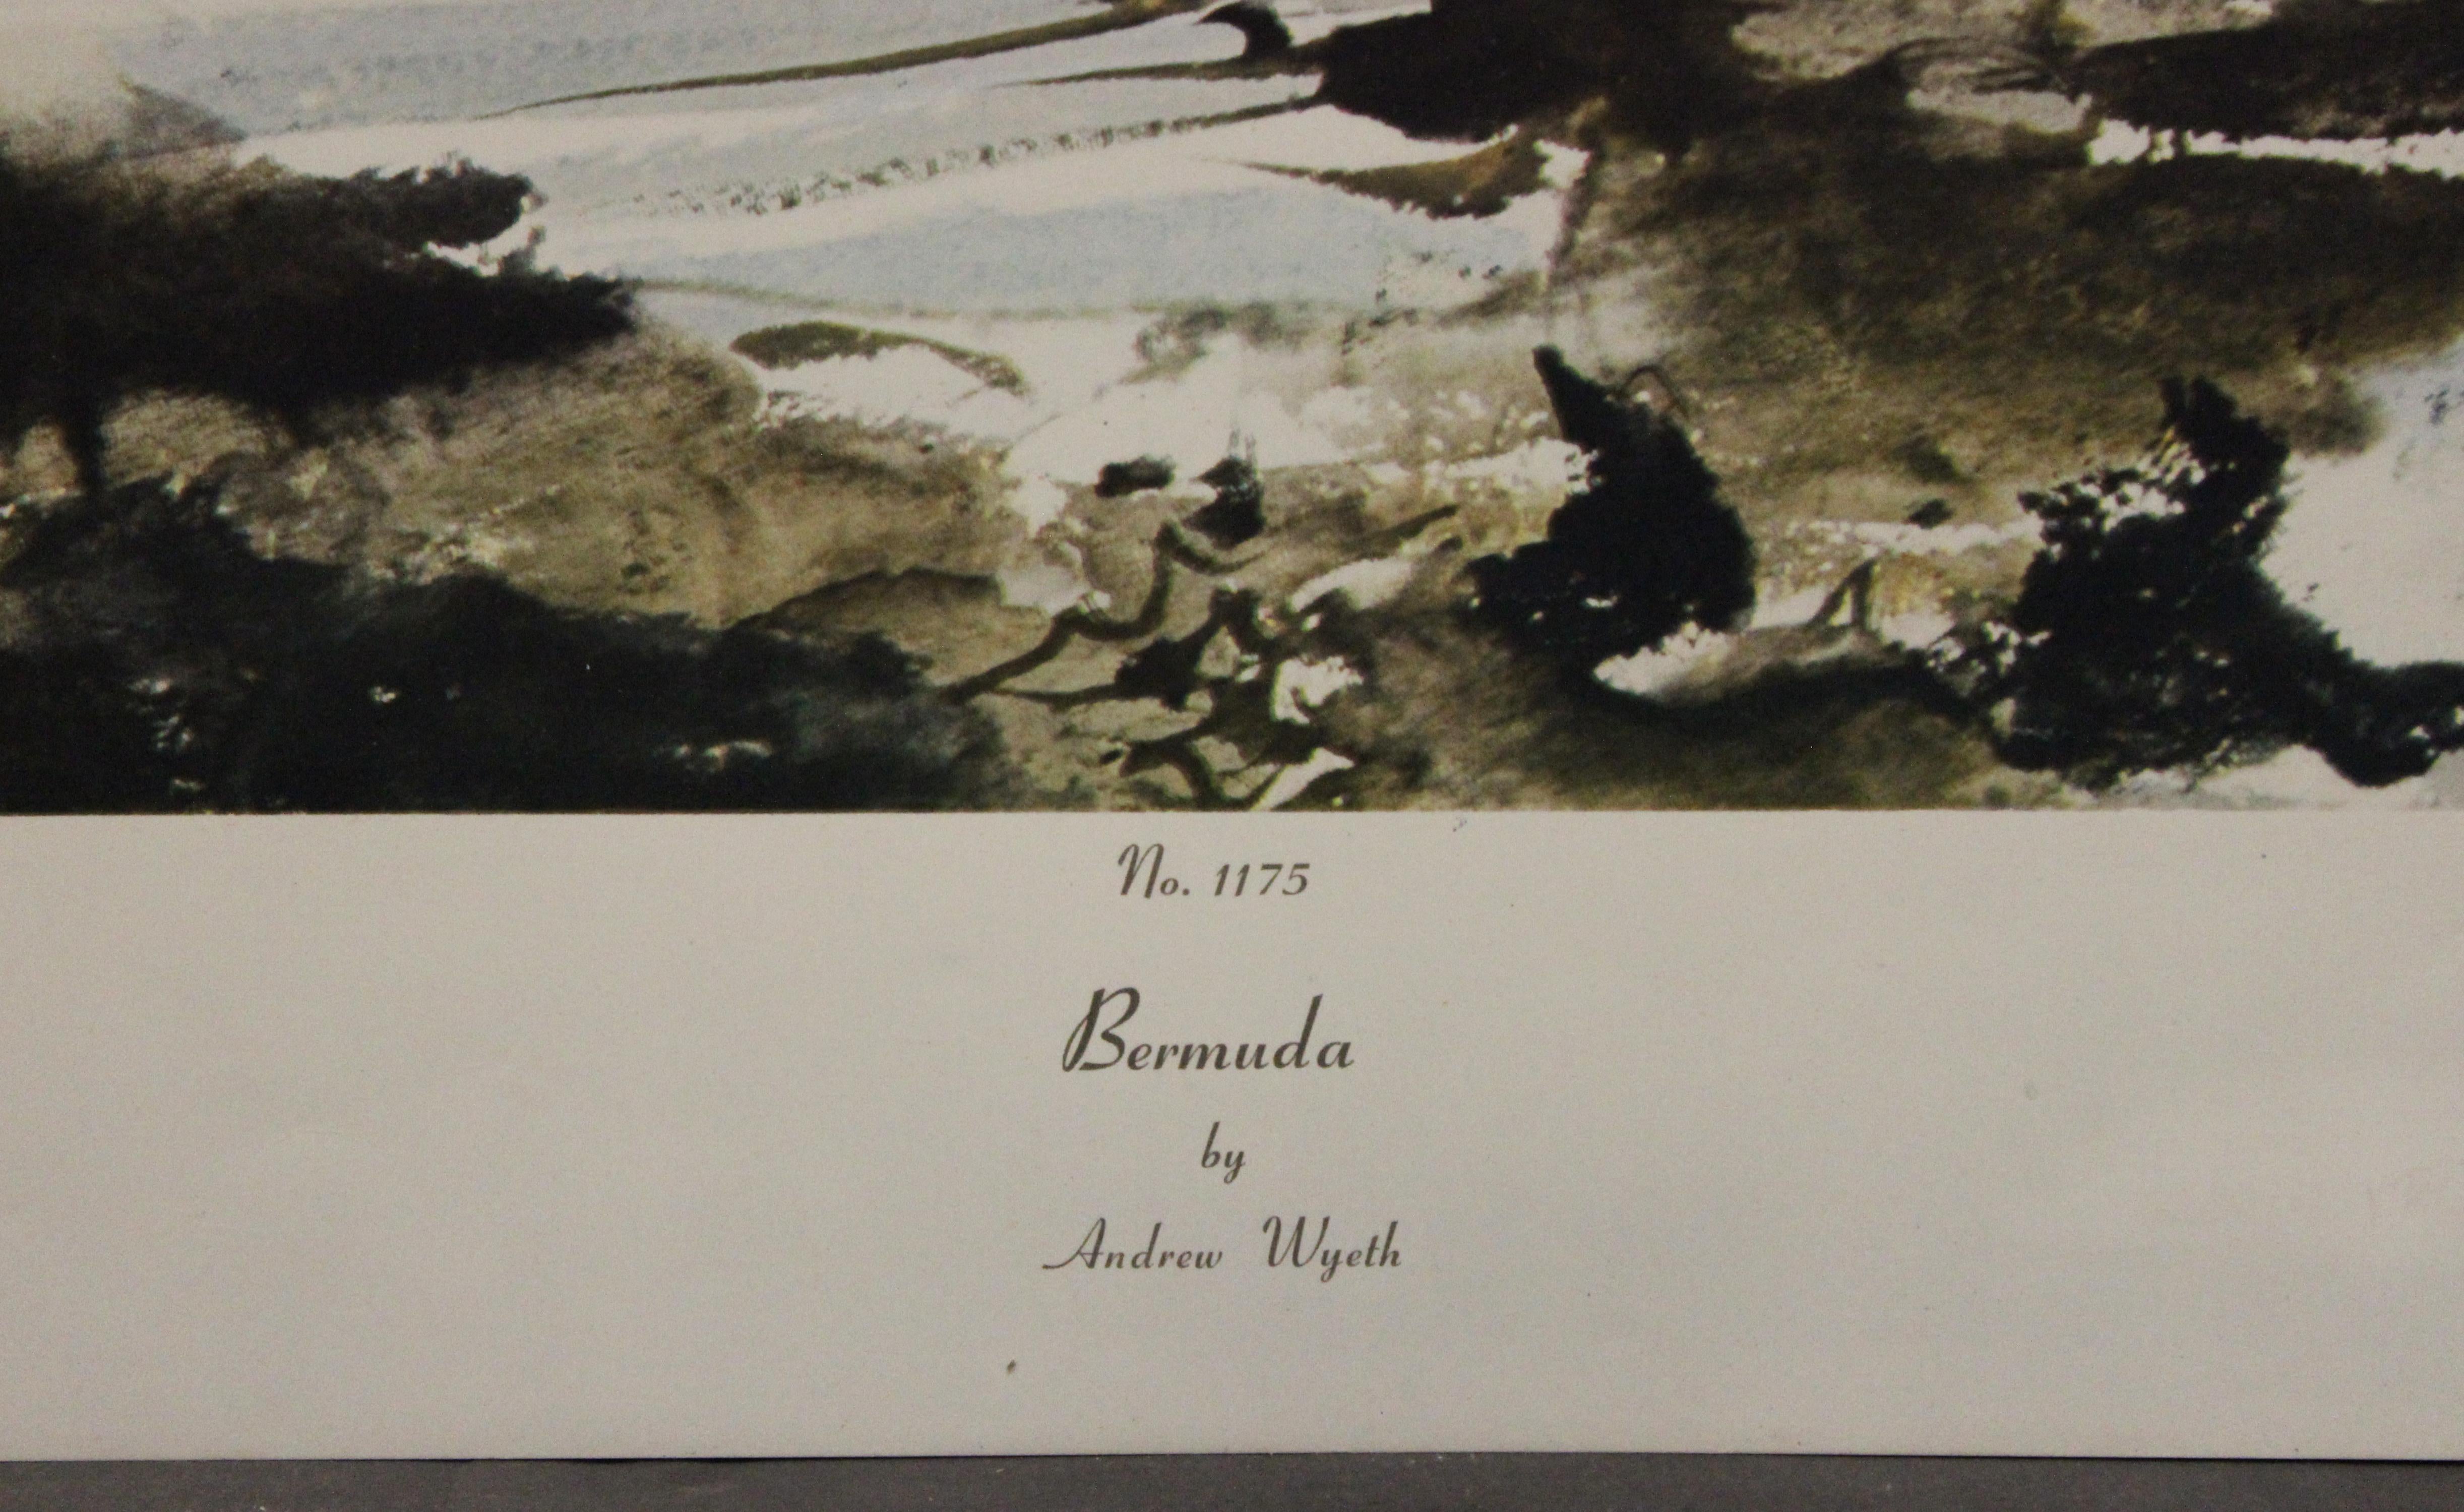 Bermuda-Poster. Copyright Aaron Ashley, Inc. - Print by (after) Andrew Wyeth